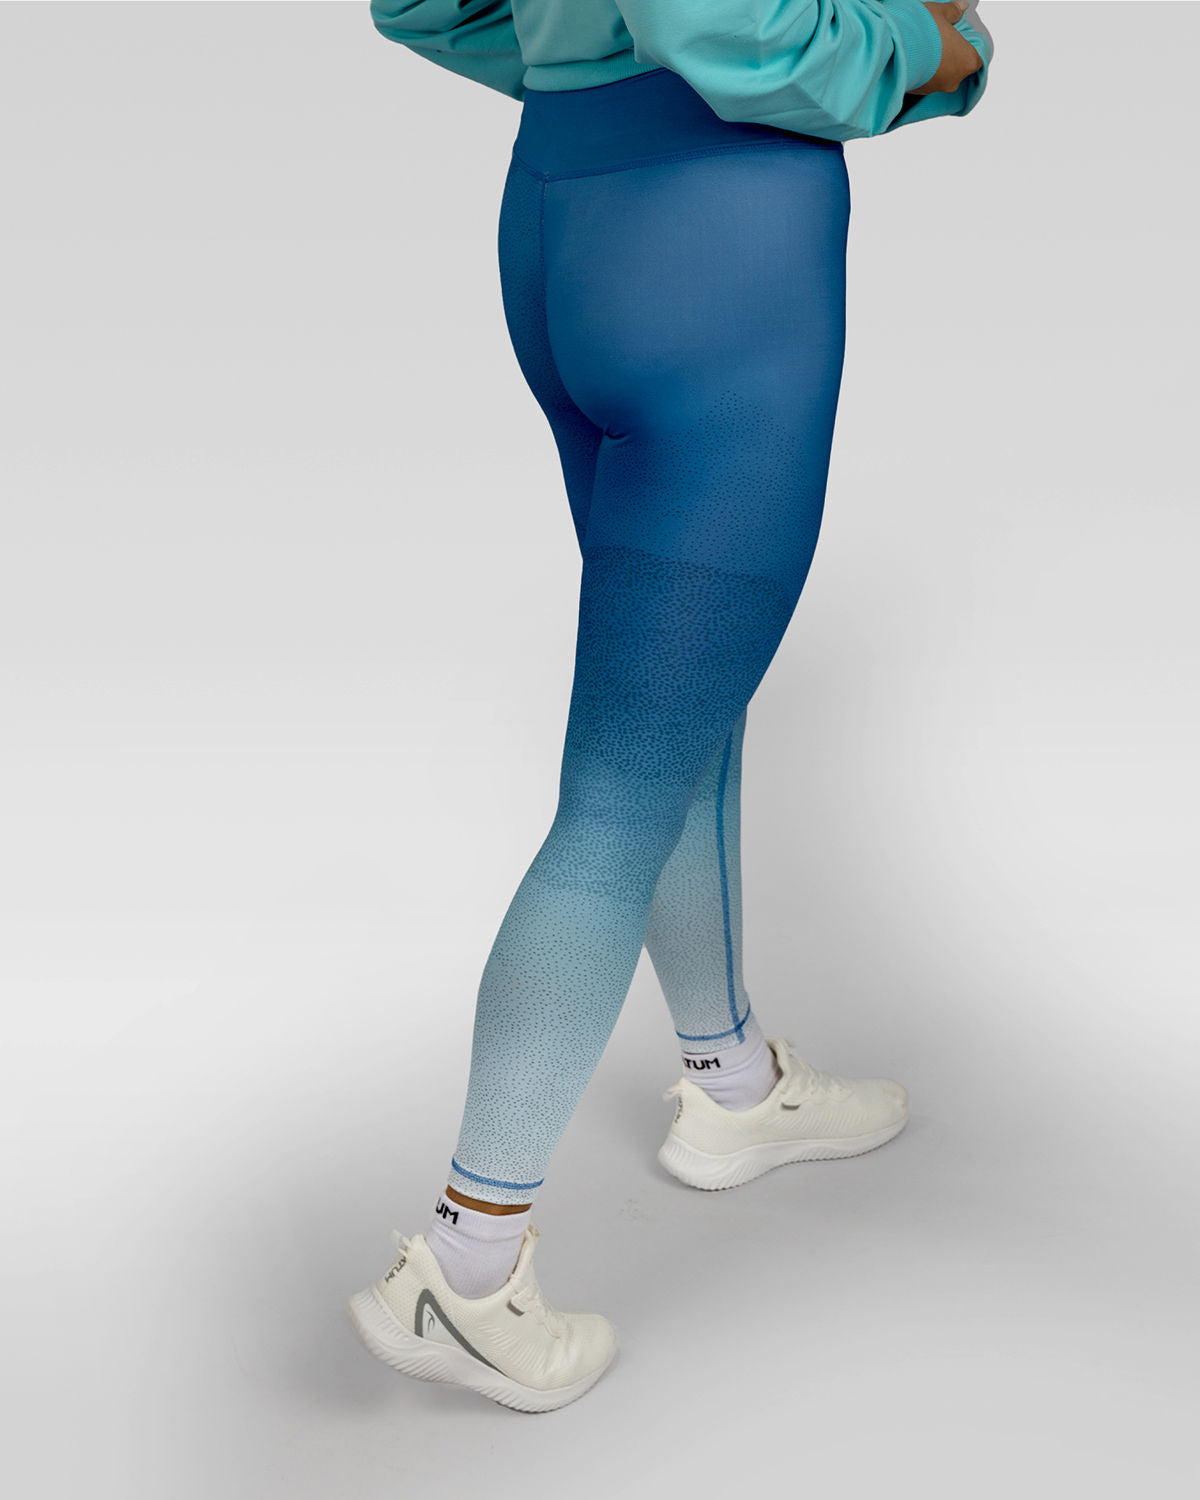 Photo by 𝗔𝗧𝗨𝗠 SPORTSWEAR ® on December 20, 2022. May be an image of 1 woman wears blue gradient leggings with white shoes.